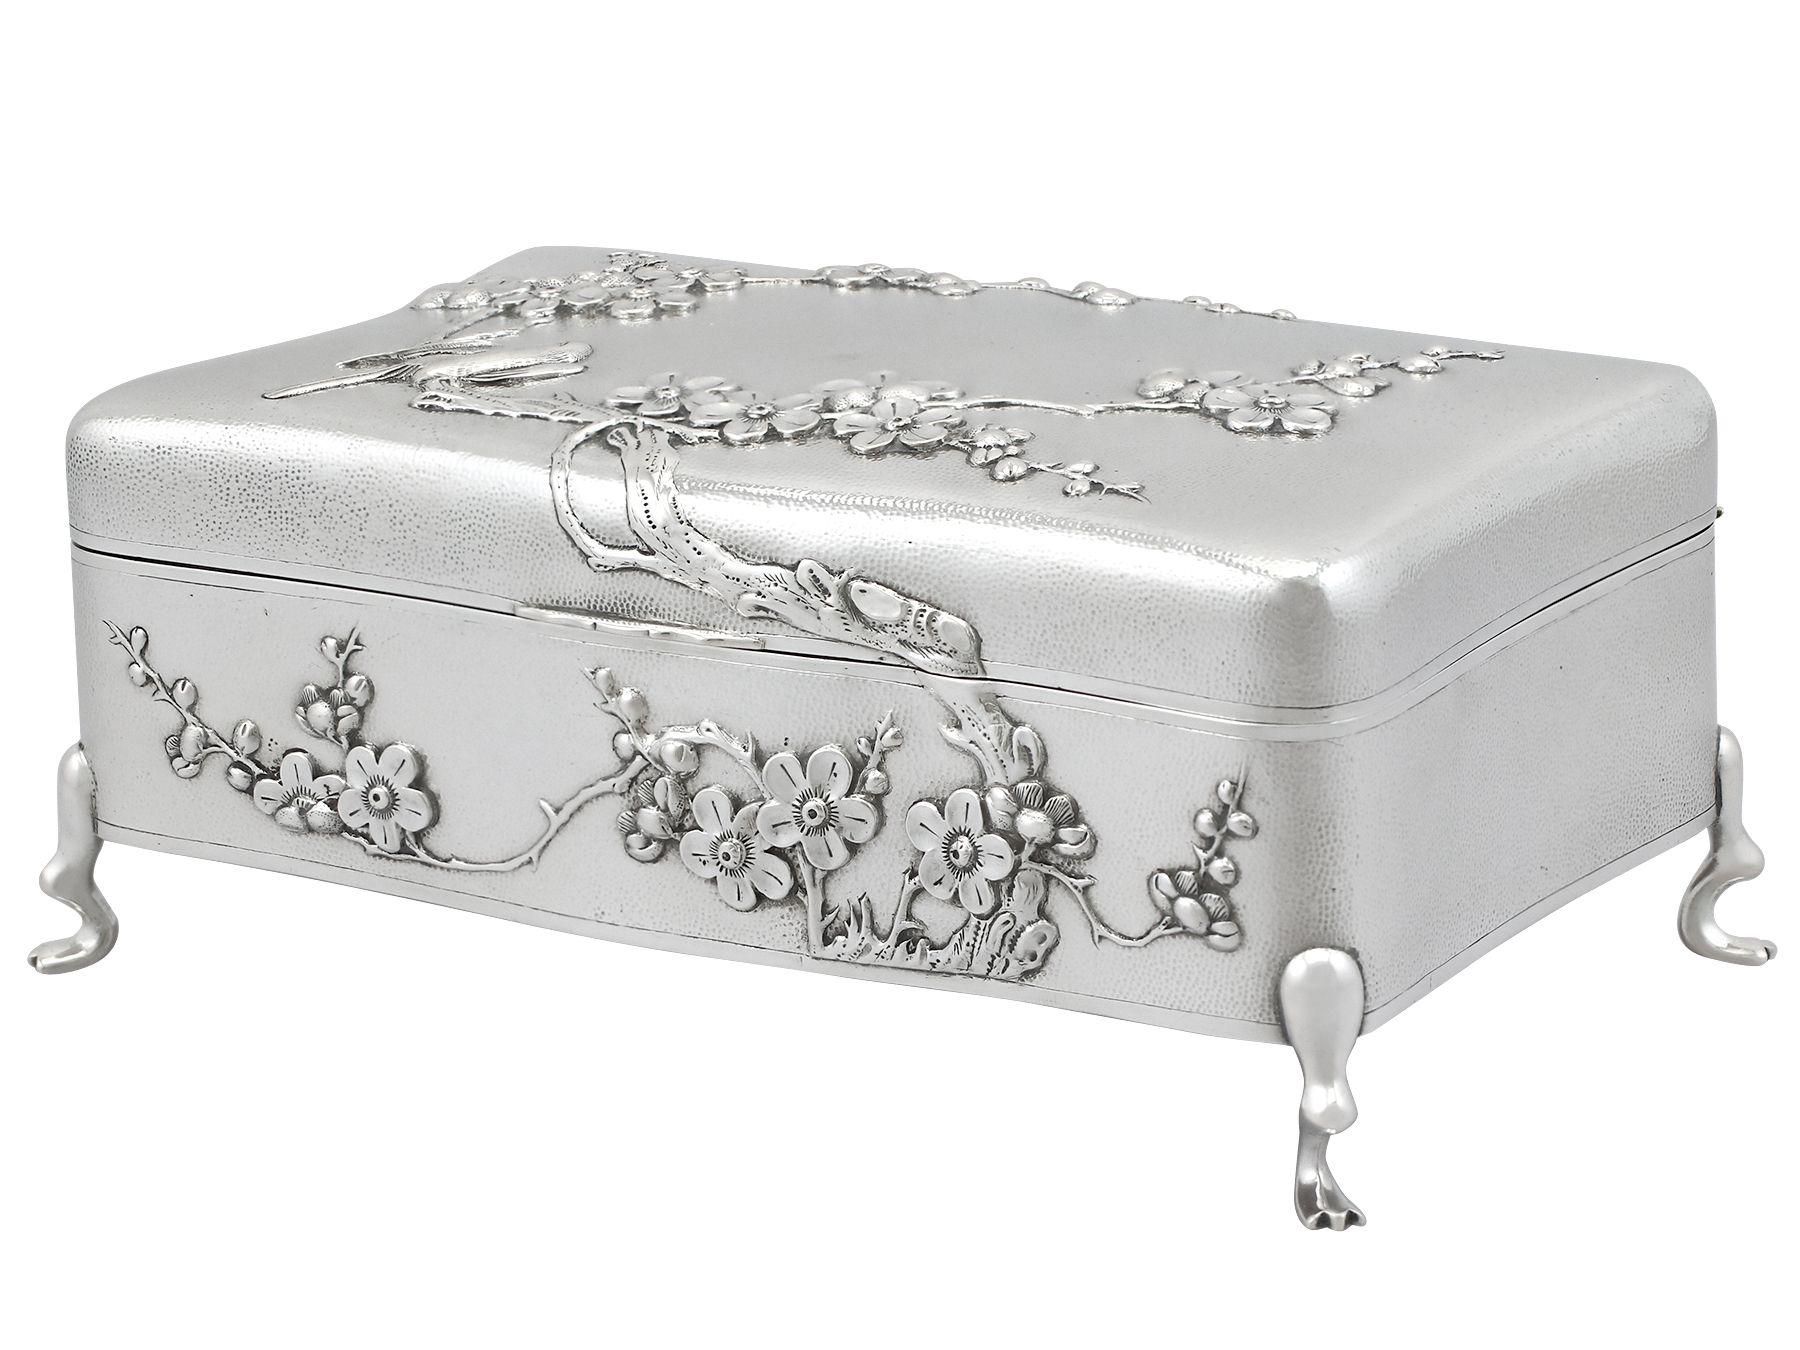 An exceptional, fine and impressive antique Chinese Export silver jewellery box; an addition to our collection of boxes and cases

This exceptional antique Chinese Export Silver box has a subtly undulating rectangular form.

The surface of the